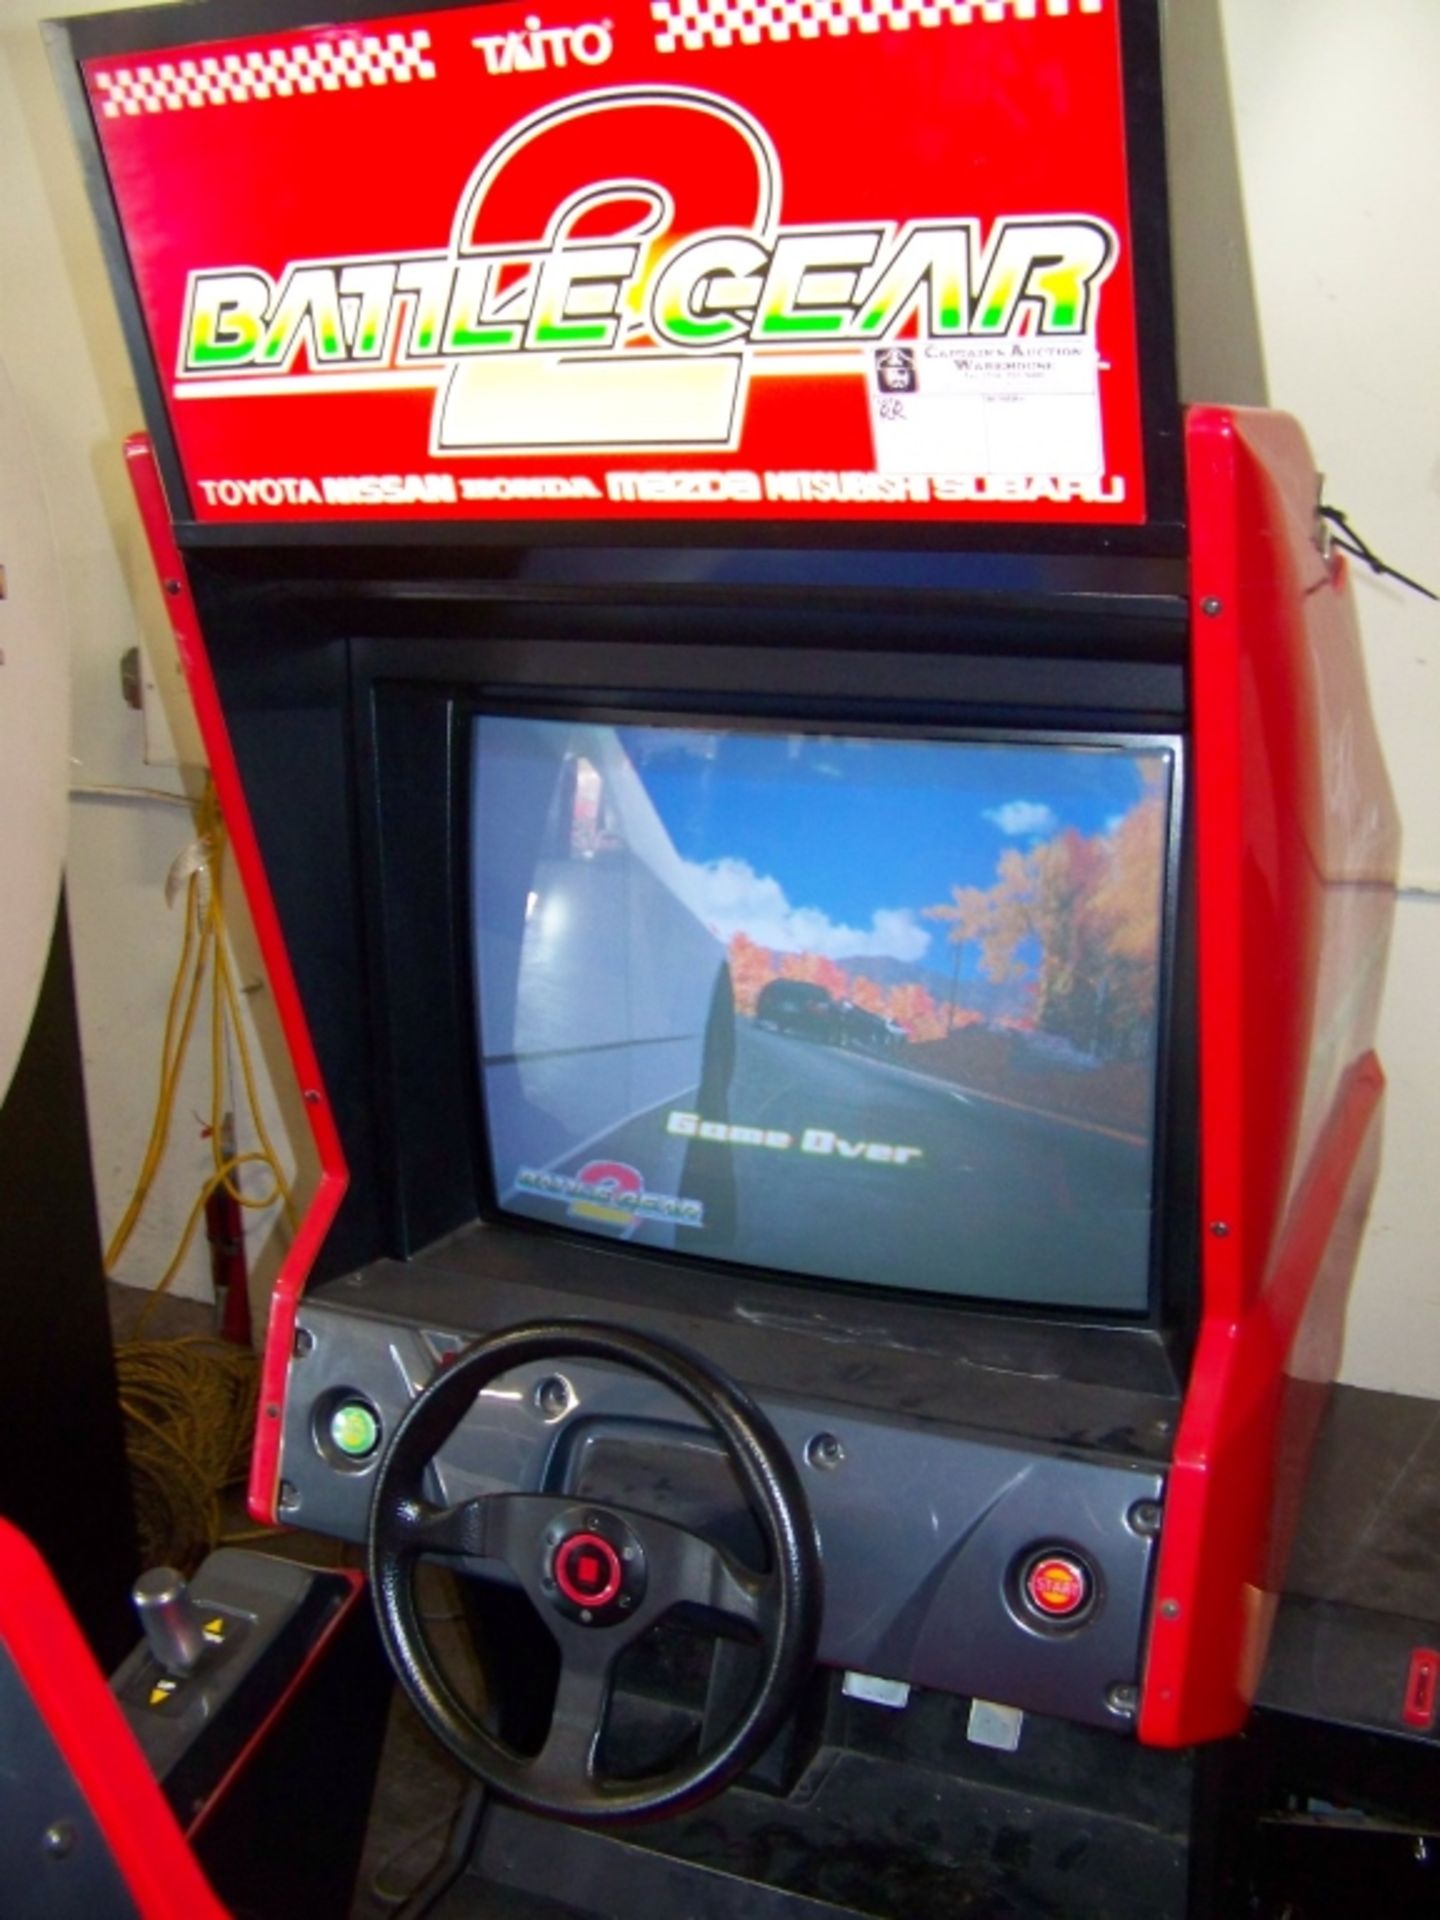 BATTLE GEAR 2 SINGLE SEAT RACING ARCADE GAME TAITO - Image 3 of 4